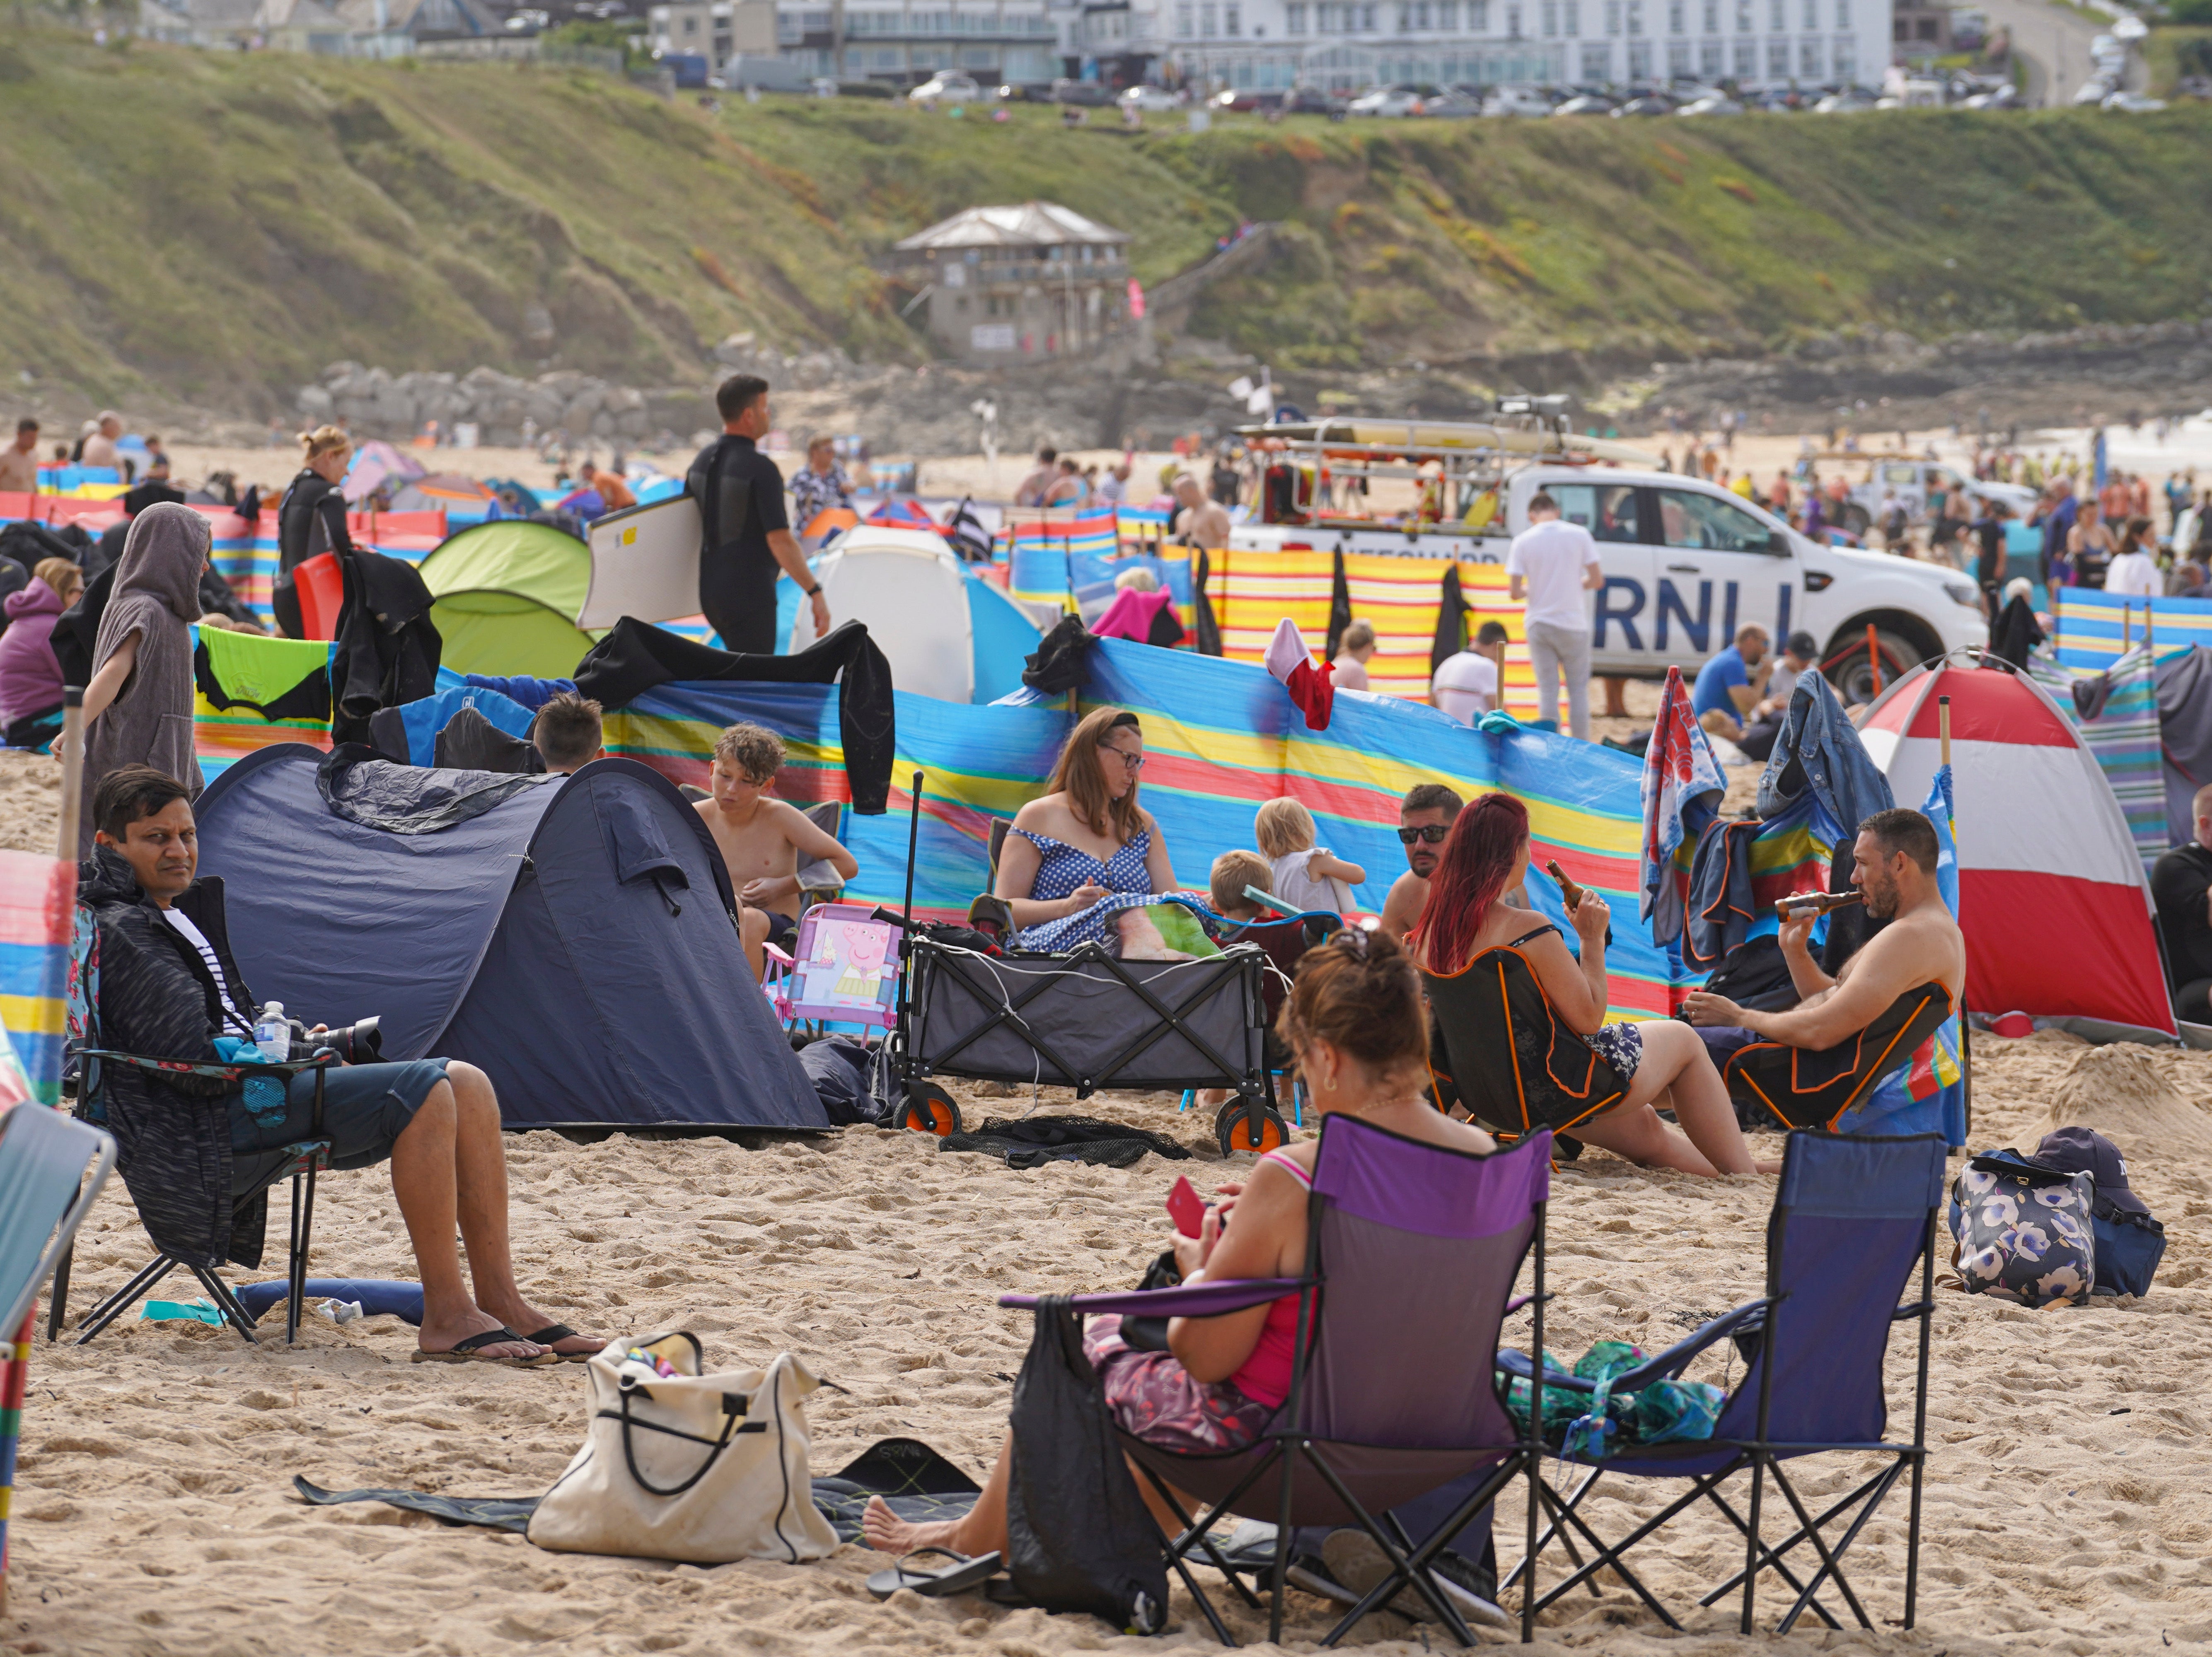 Holidaymakers on the beach in Cornwall in summer 2021